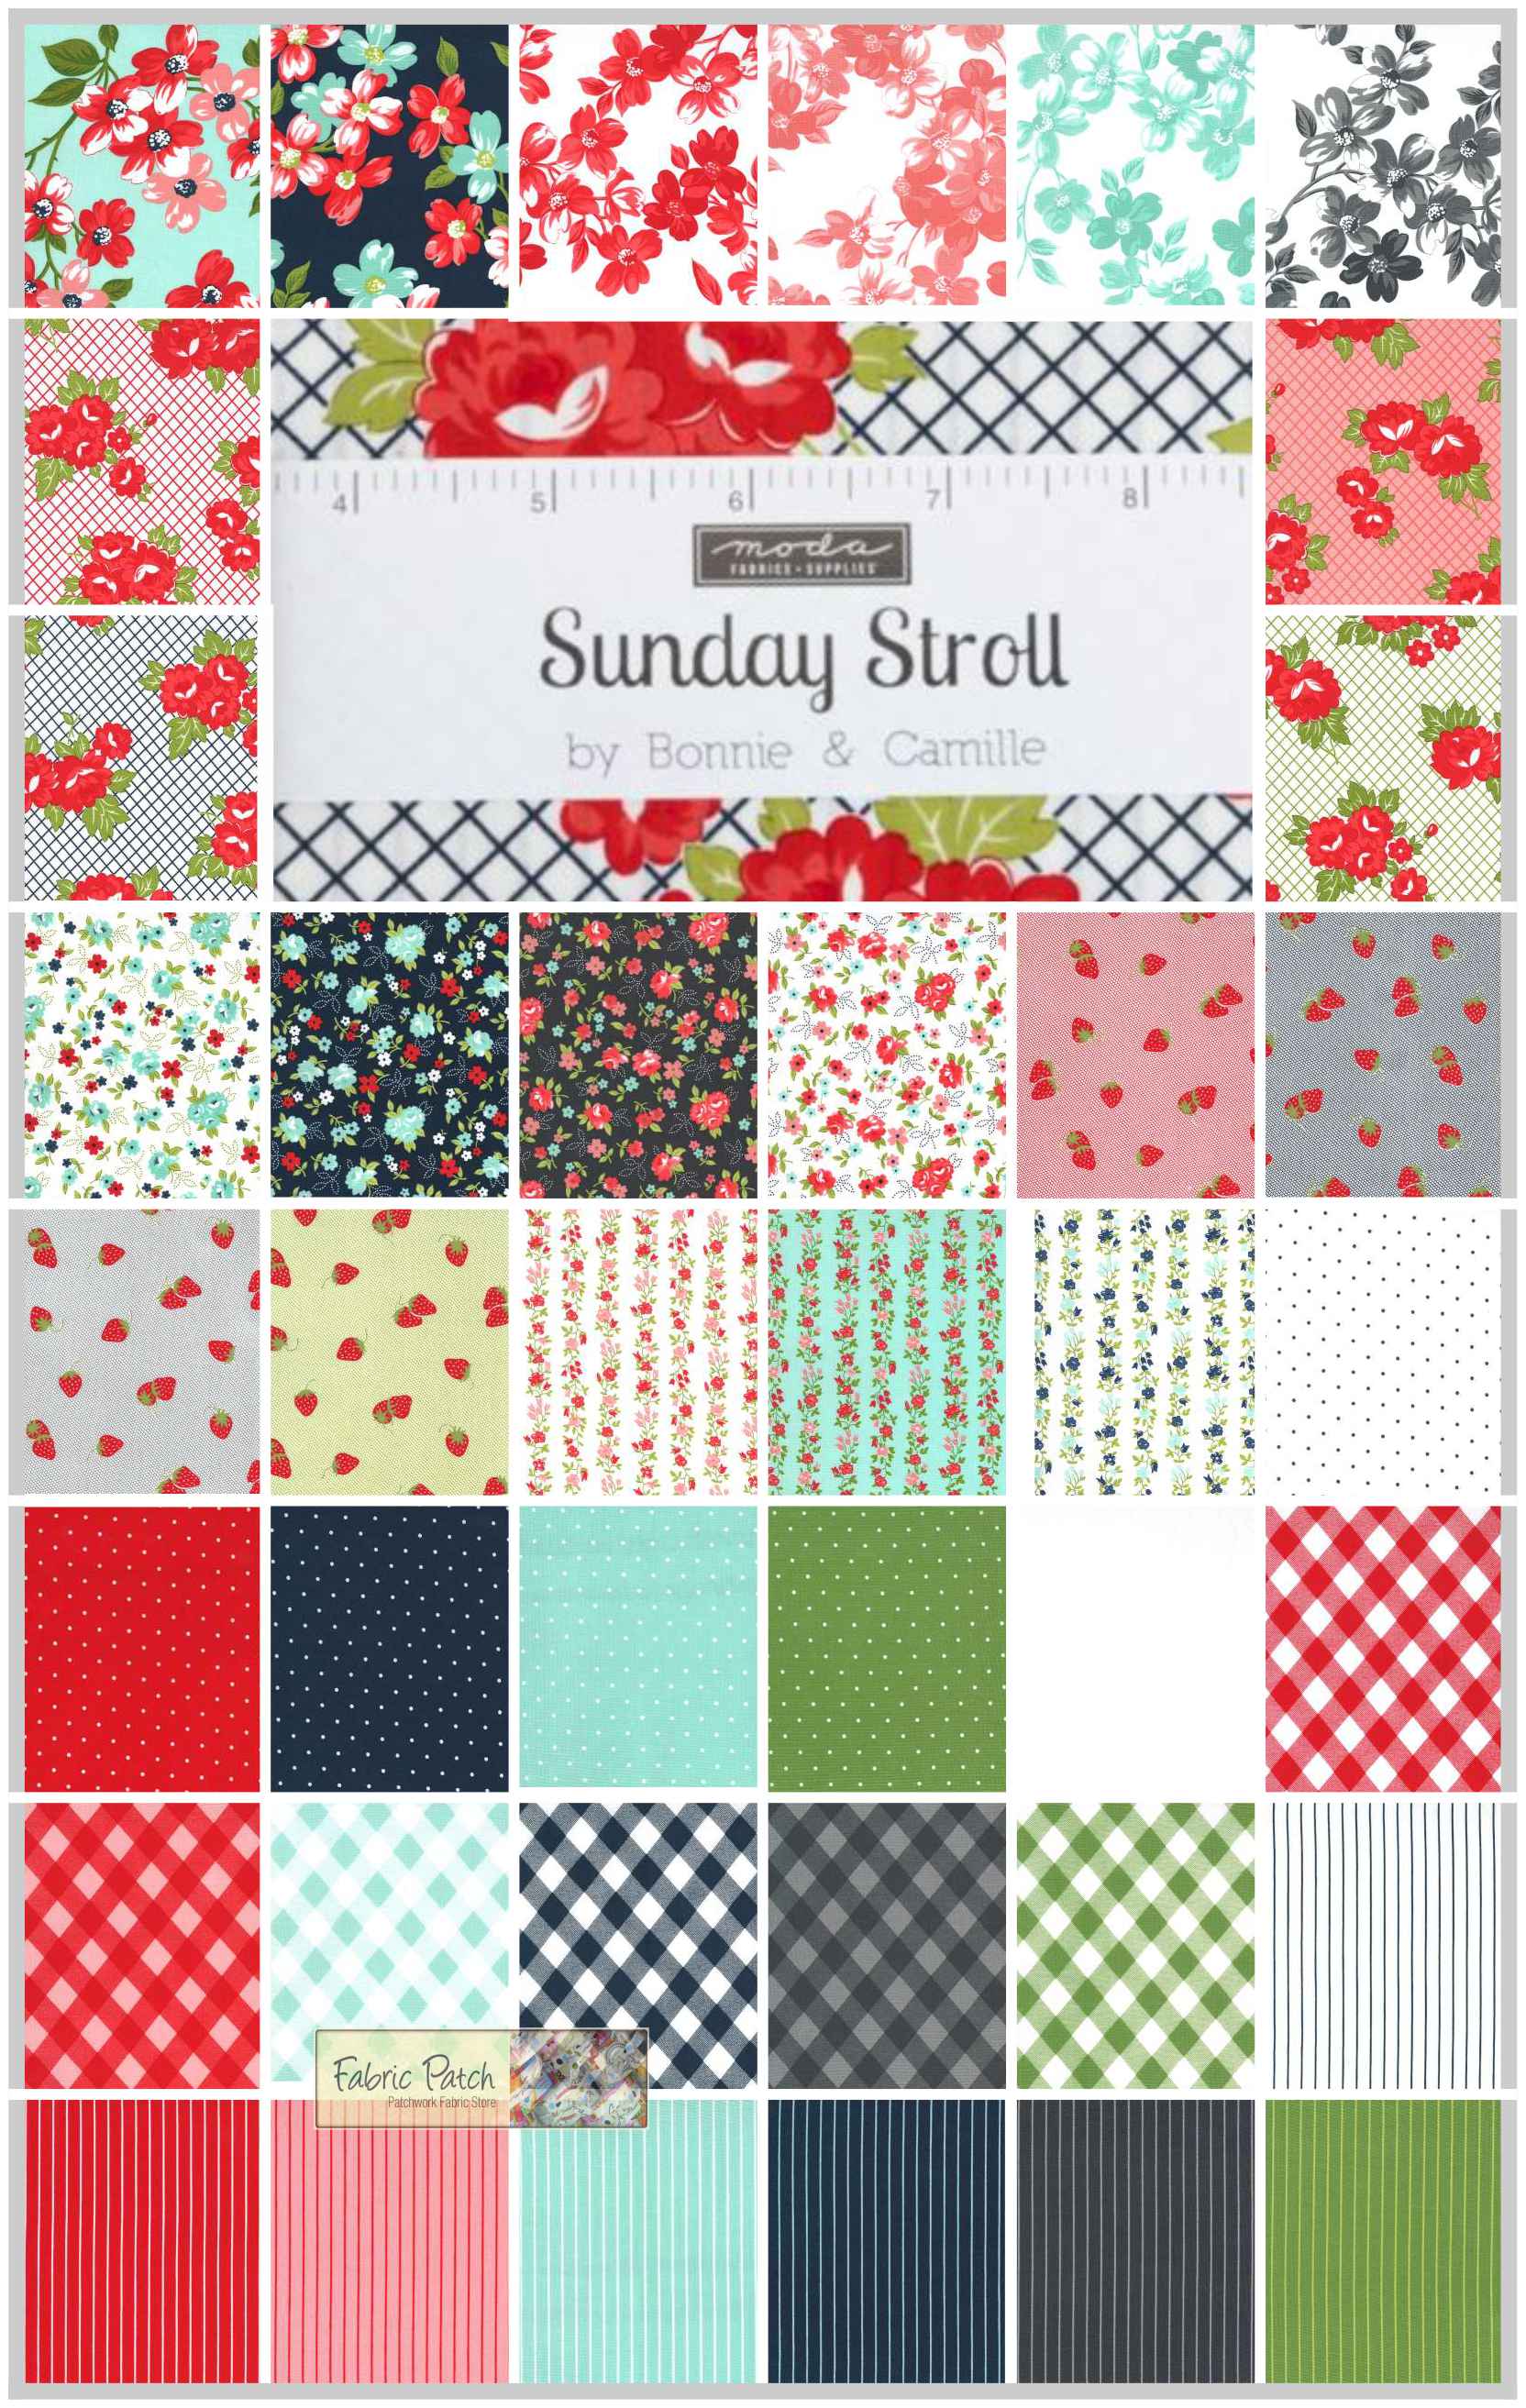 Sunday Stroll fat quarter bundle by Bonnie & Camille for Moda Fabrics - patchwork and quilting fabric